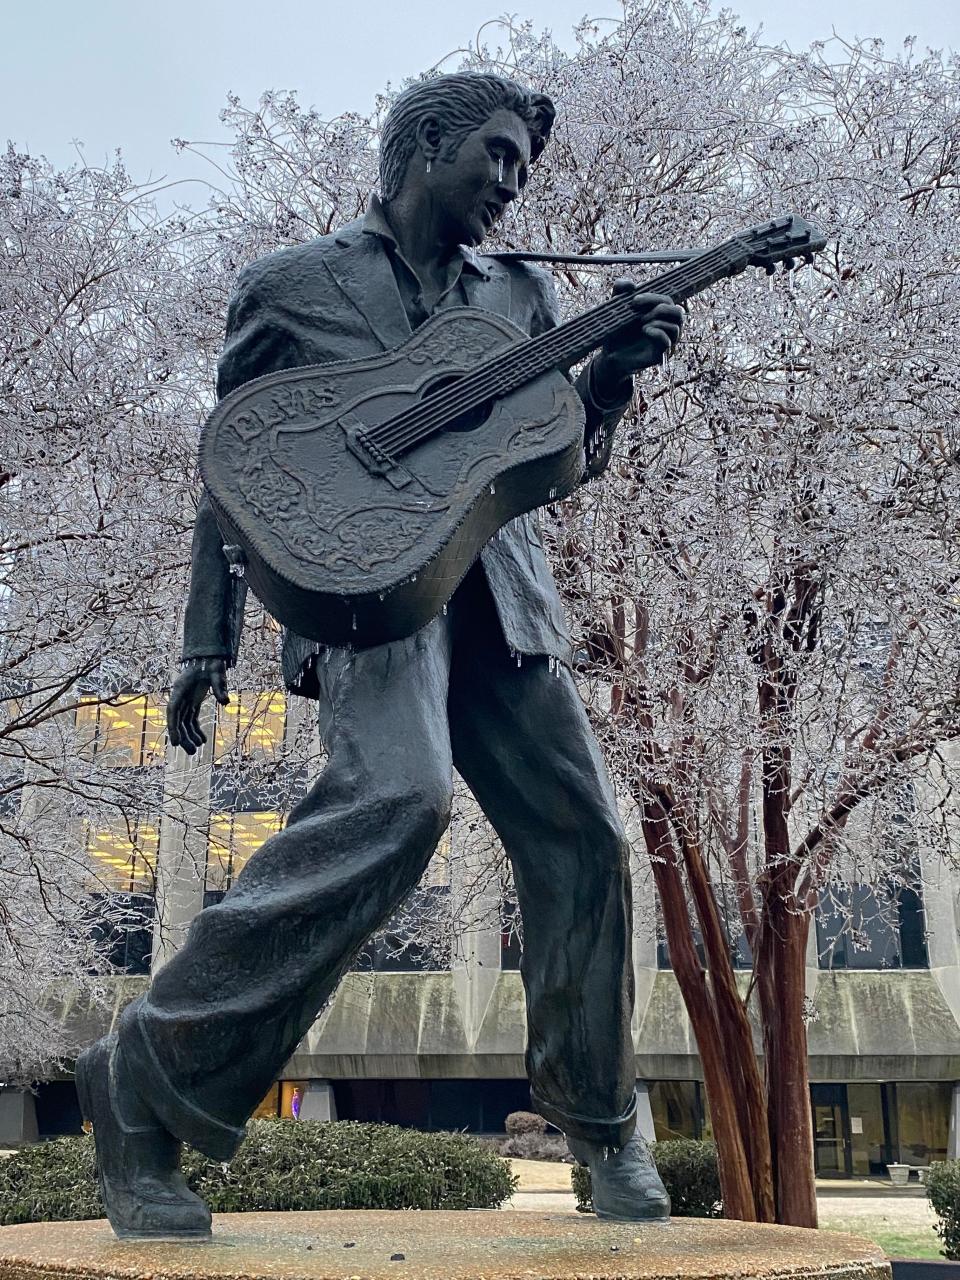 Ice blankets over Memphis and the Mid-South on Tuesday, Jan. 31, 2023. Ice covers statues in Downtown like the Elvis statue on Beale Street.